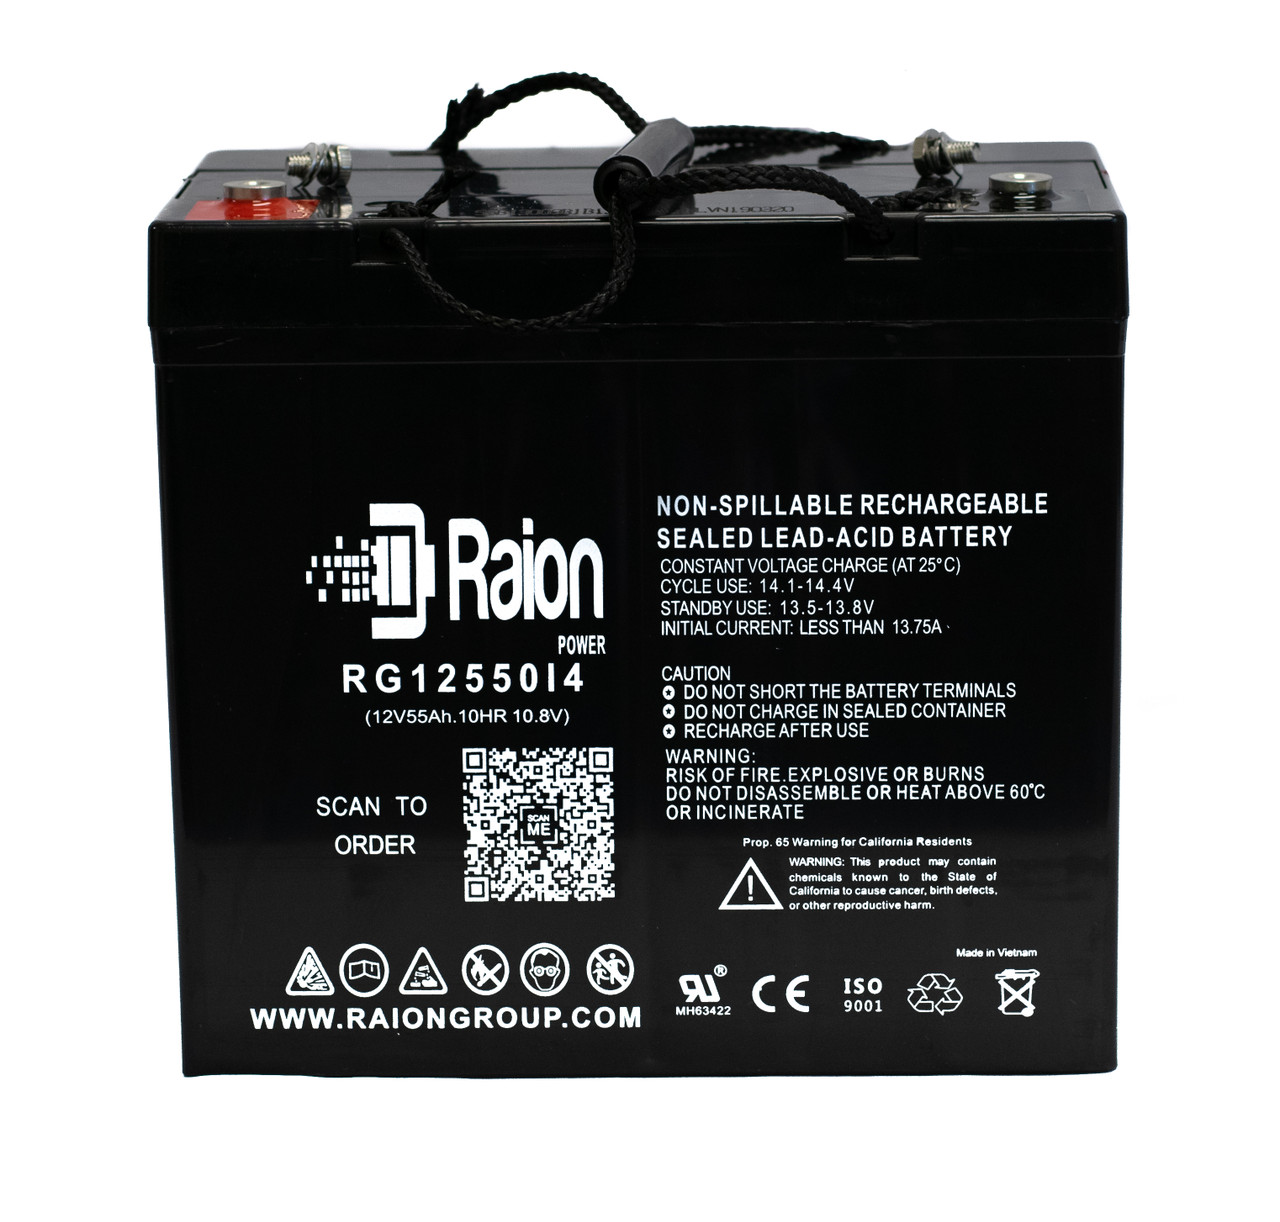 Raion Power RG12550I4 12V 55Ah Lead Acid Battery for Fortress Scooters 2001LX